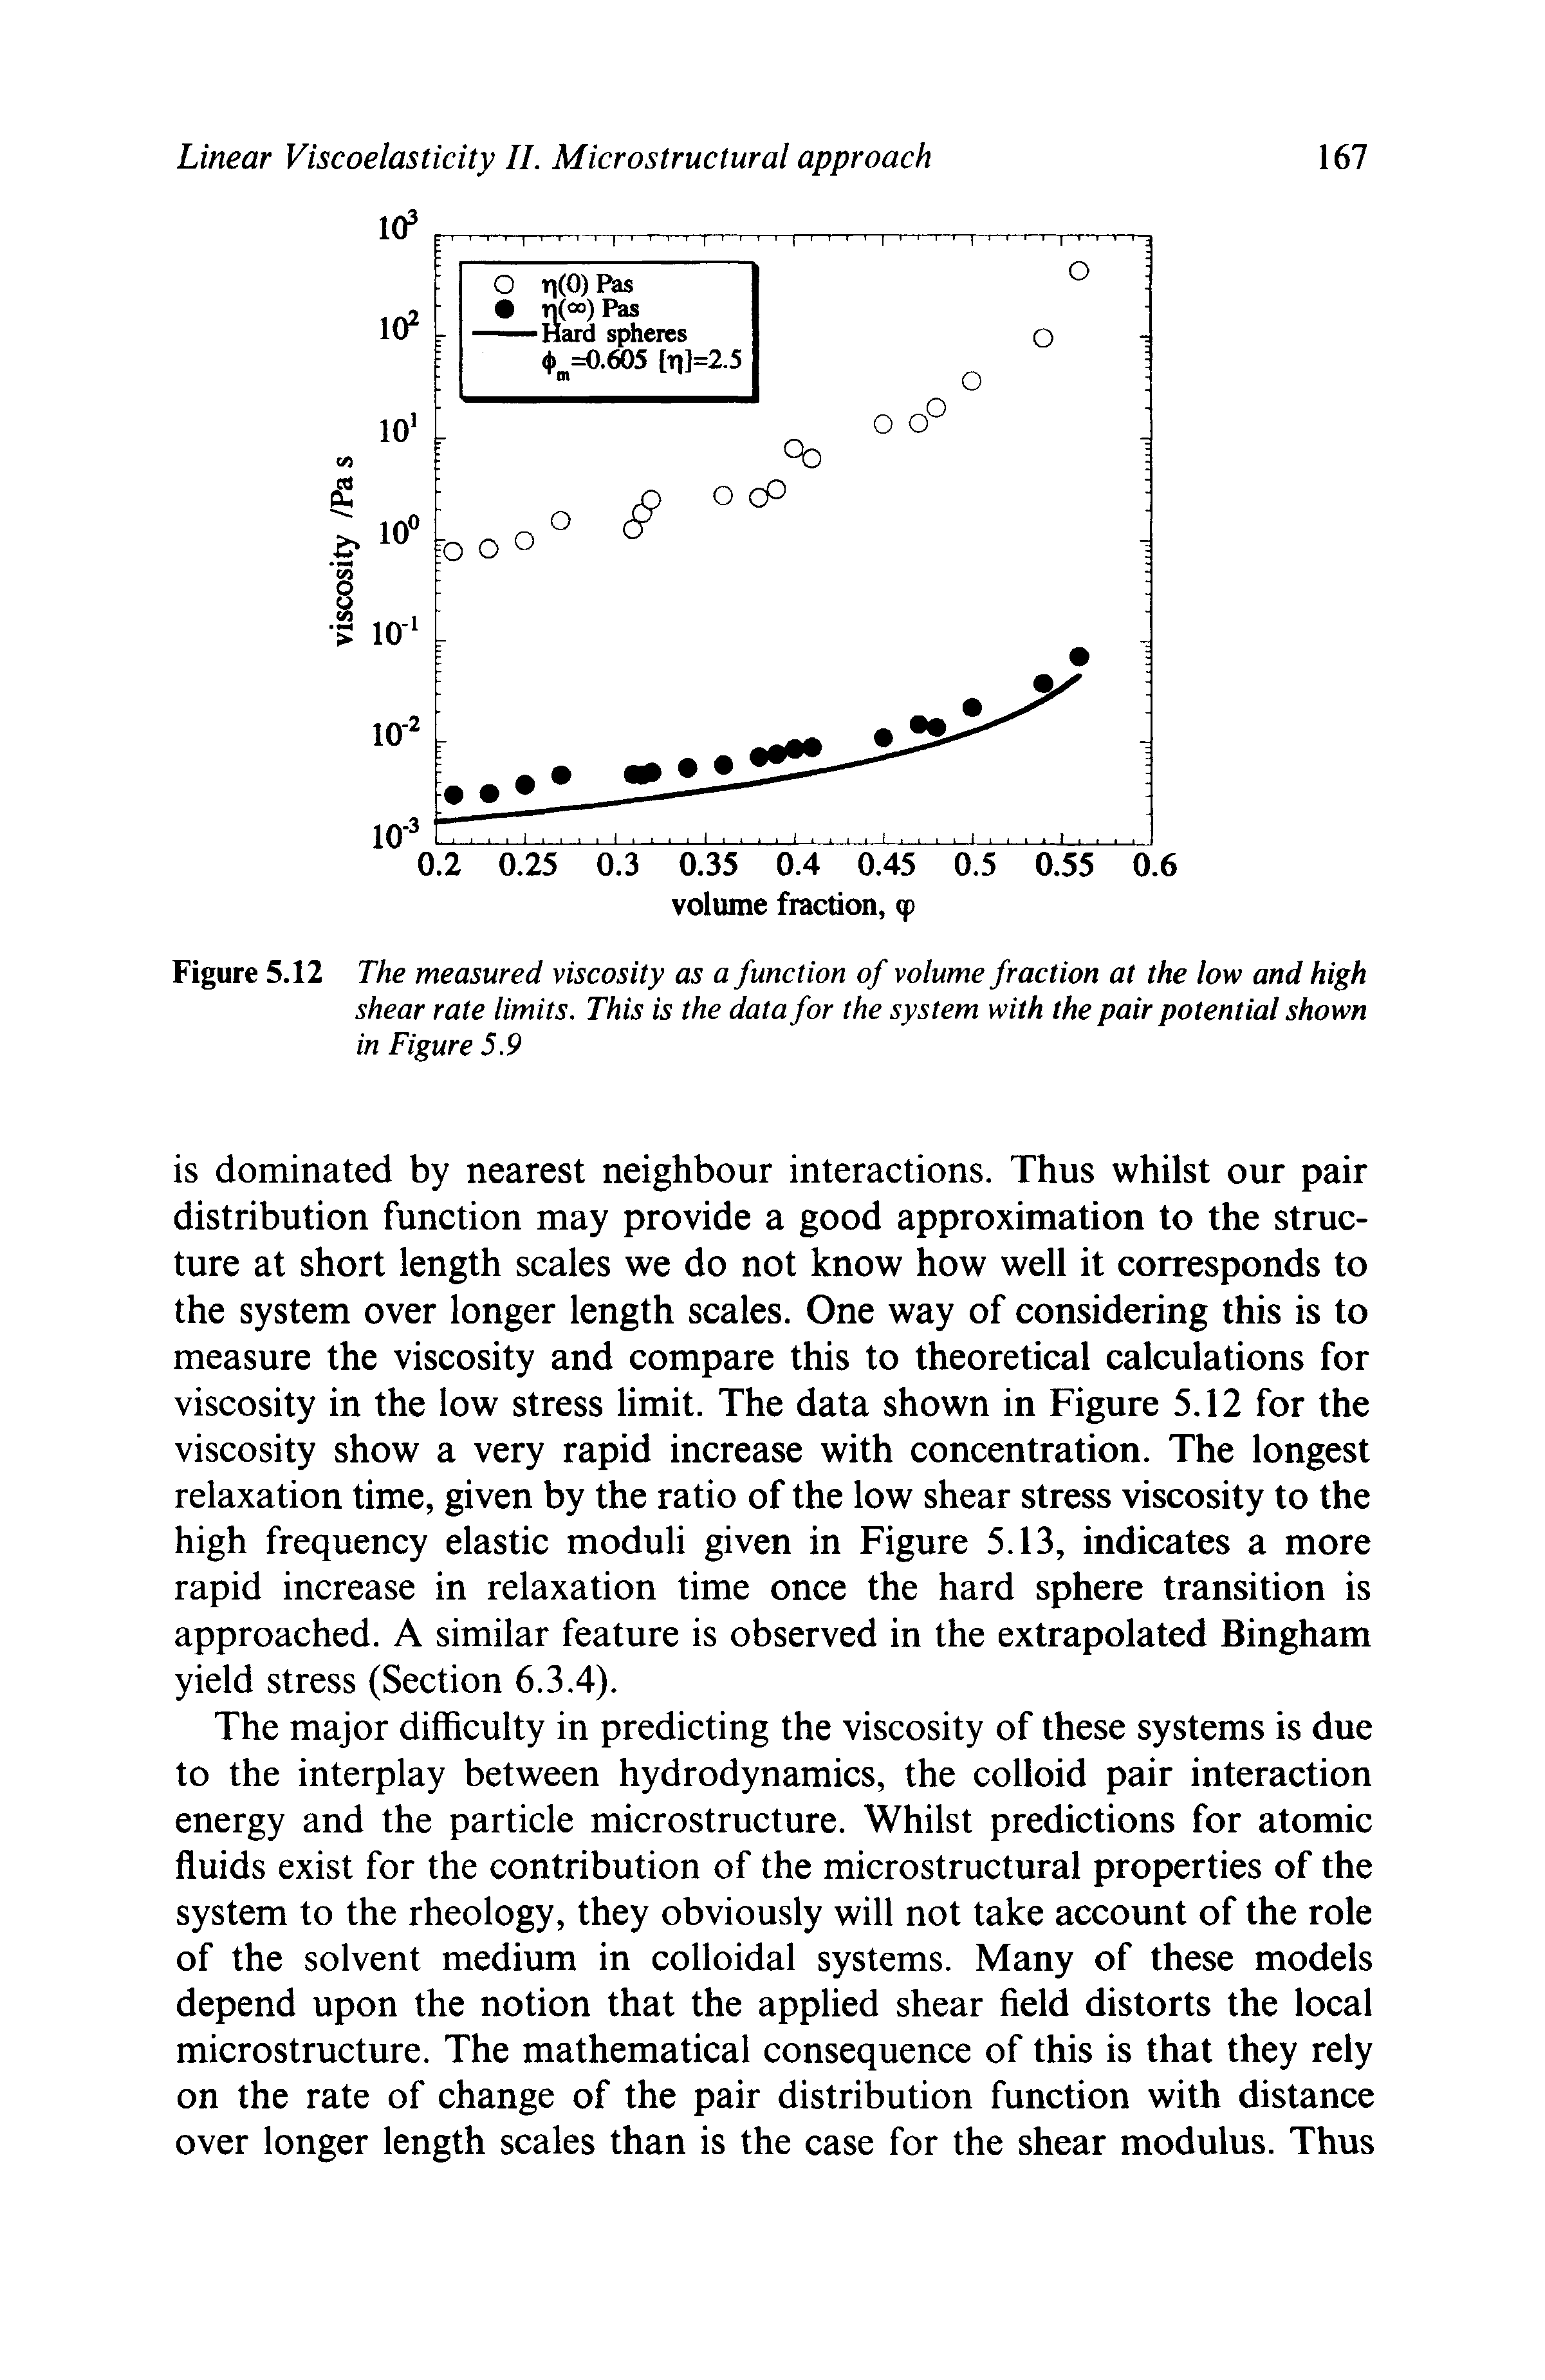 Figure 5.12 The measured viscosity as a function of volume fraction at the low and high shear rate limits. This is the data for the system with the pair potential shown in Figure 5.9...